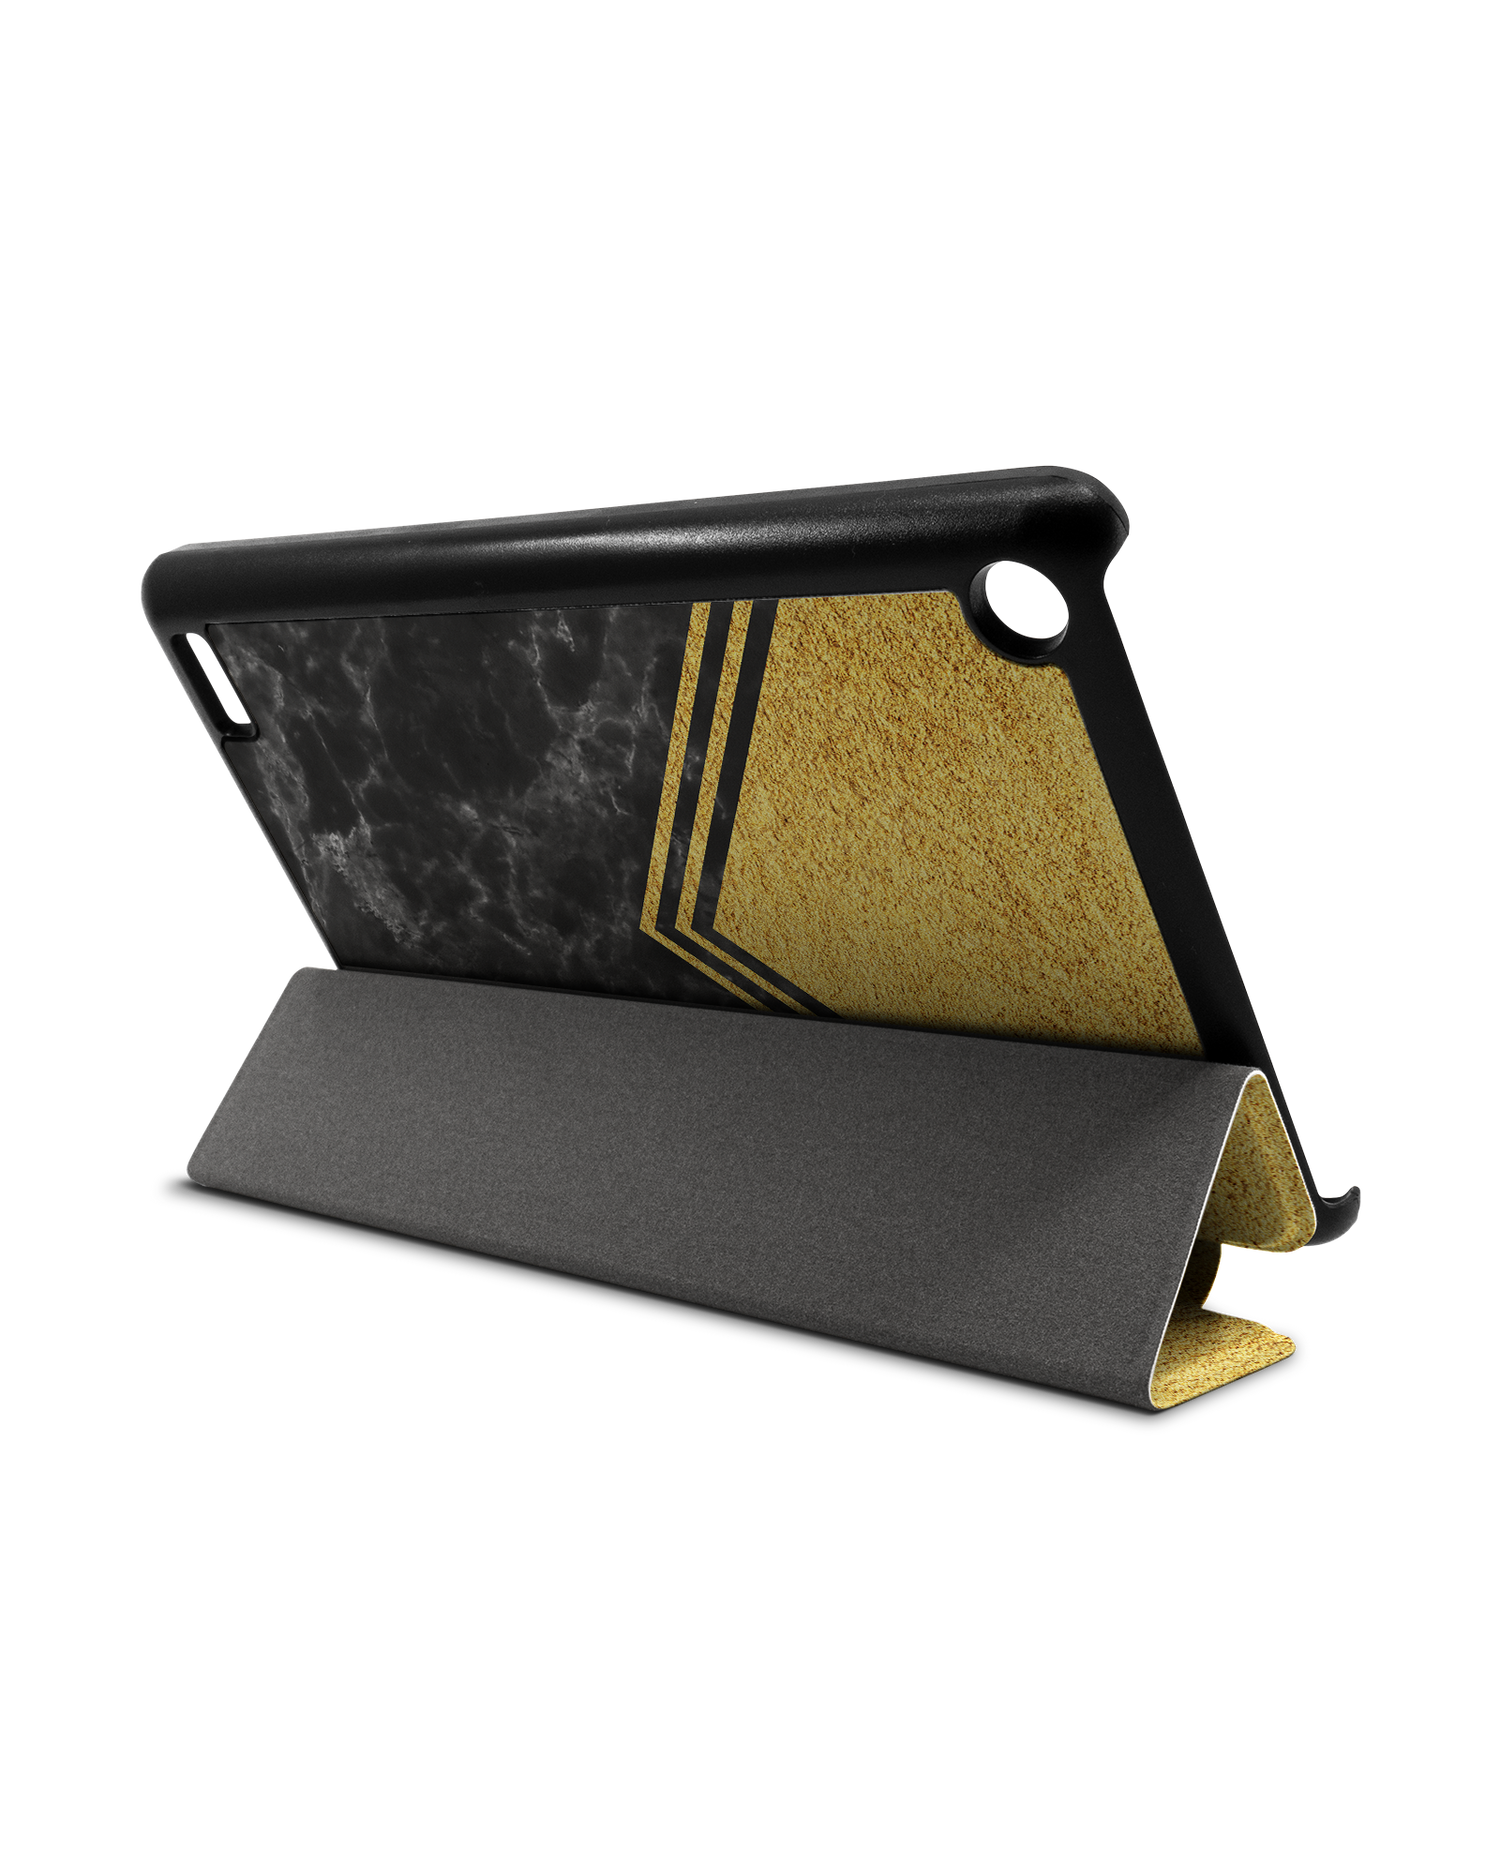 Gold Marble Tablet Smart Case for Amazon Fire 7: Used as Stand